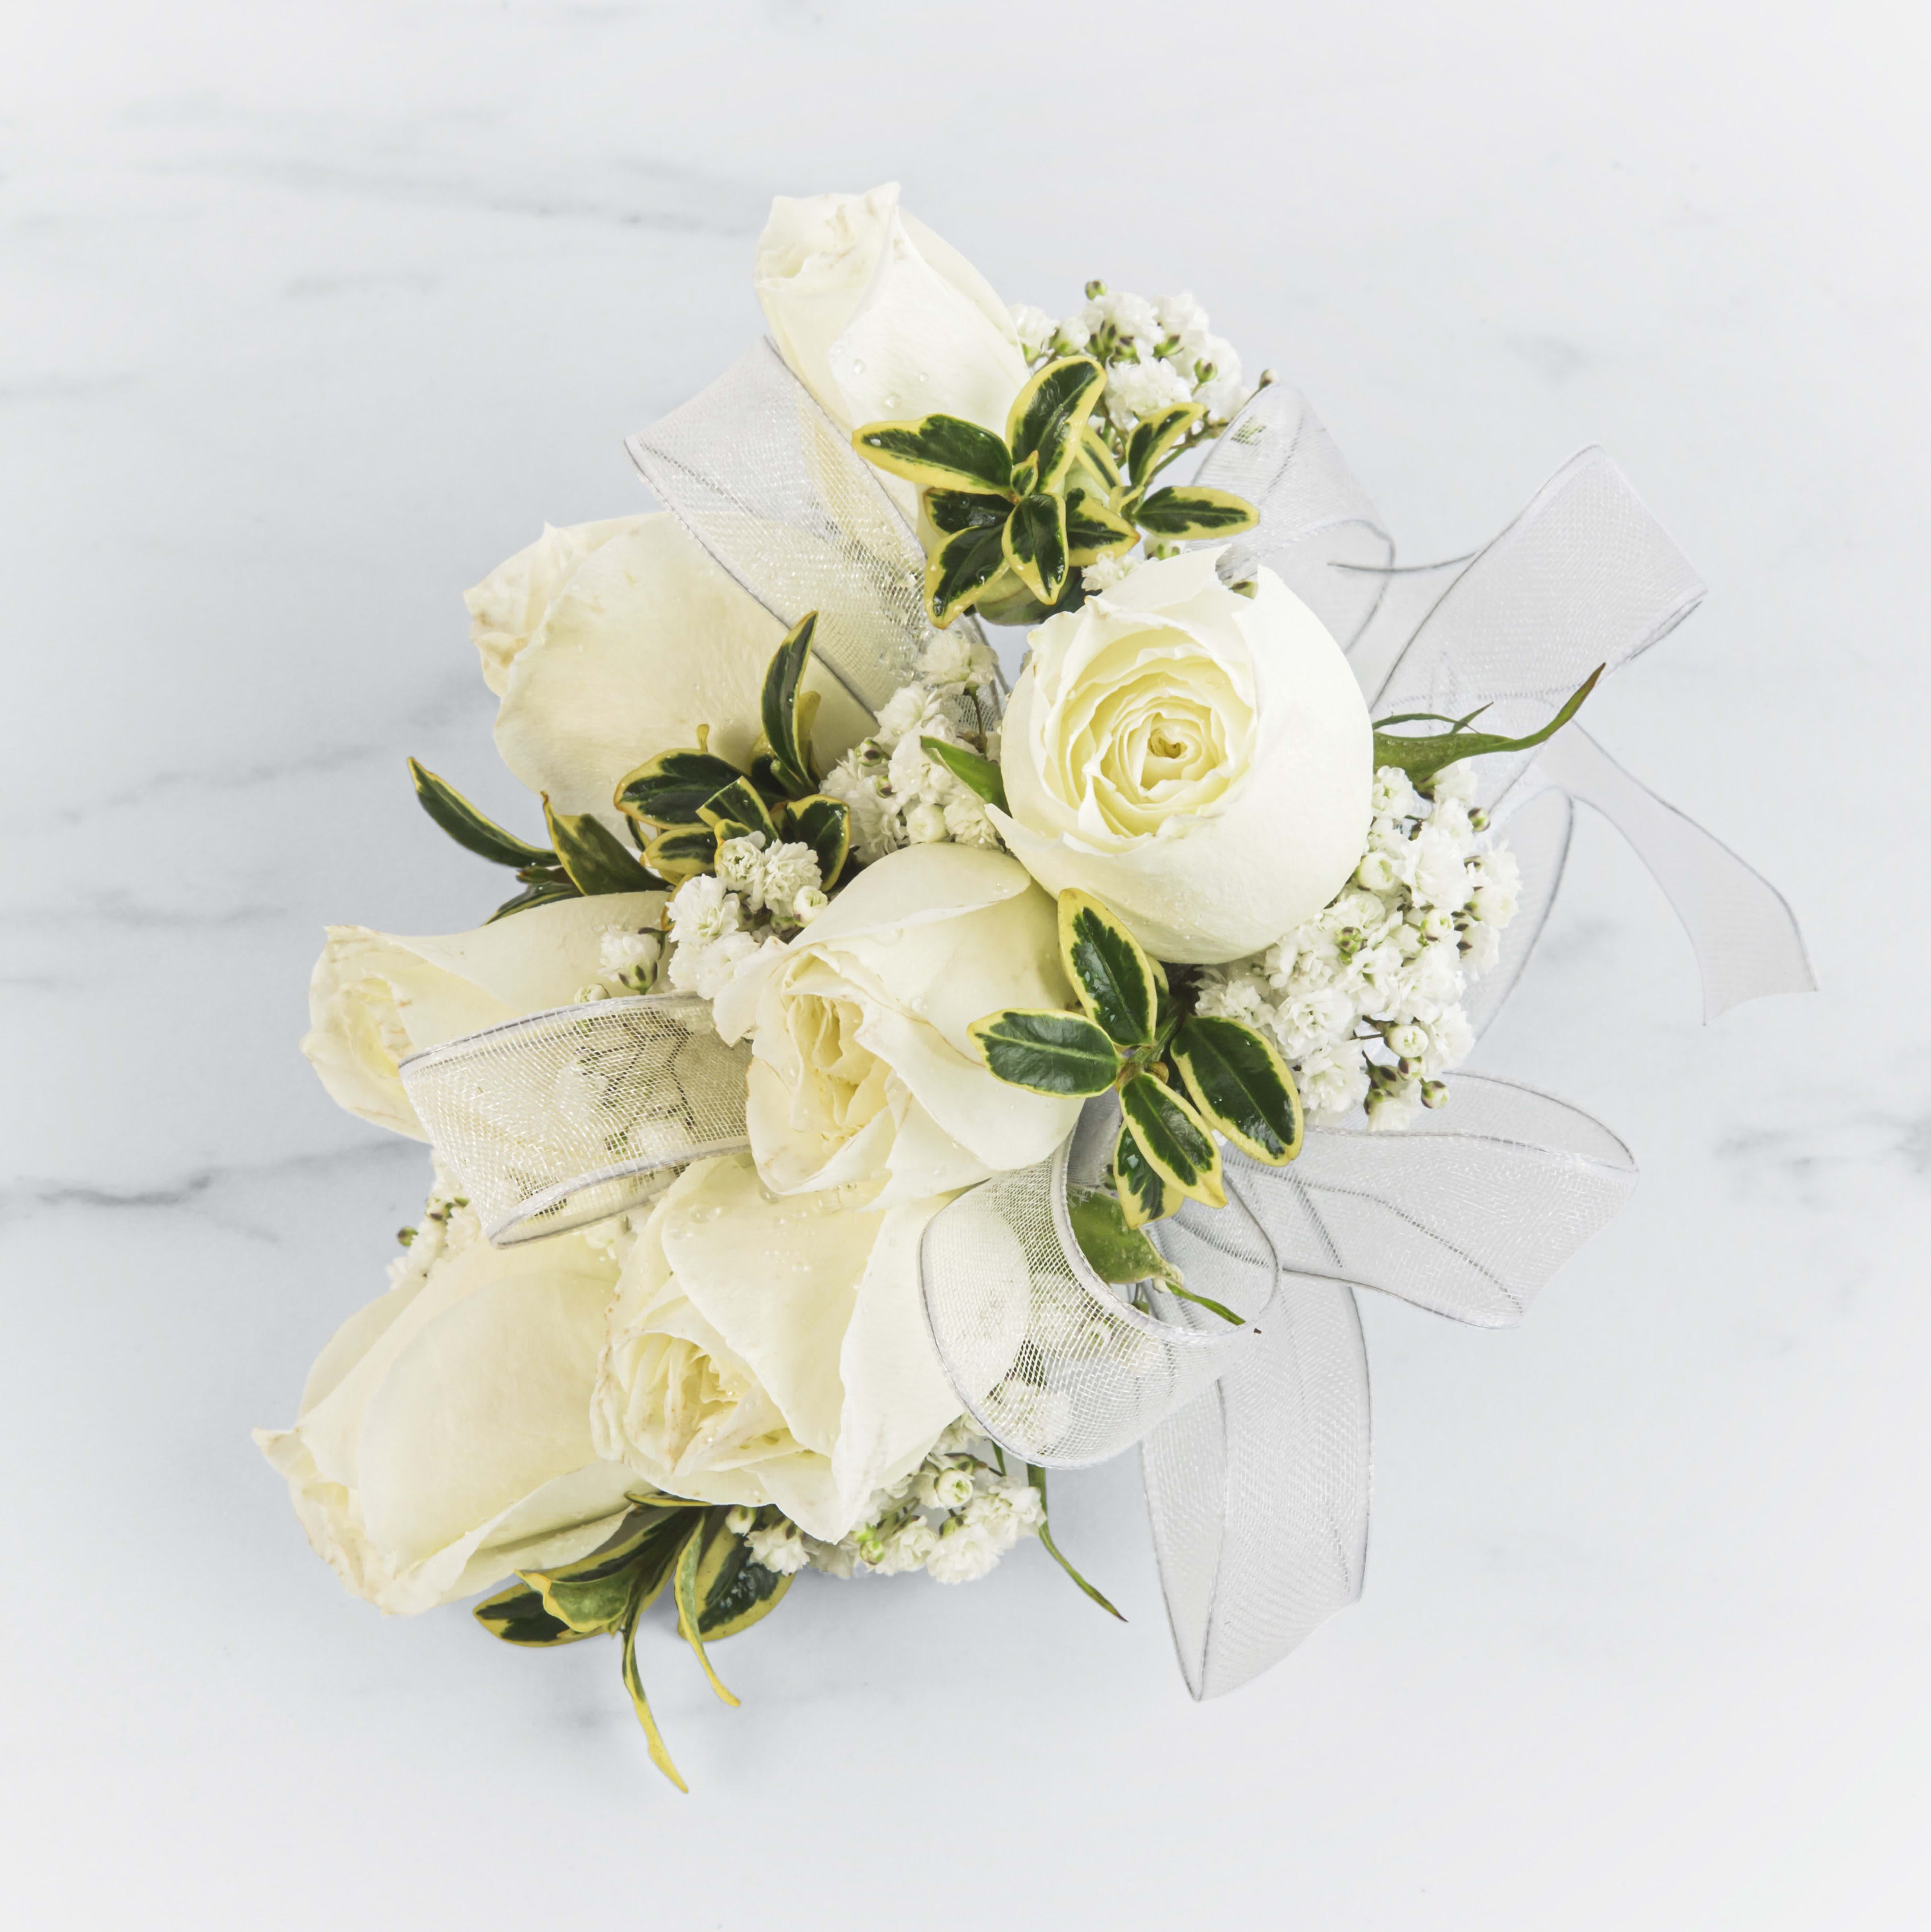 White Rose Corsage  - A classic white corsage with silver sheer ribbon, this wrist arrangement looks good with any outfit. A perfect compliment to any prom, formal, or wedding event. 